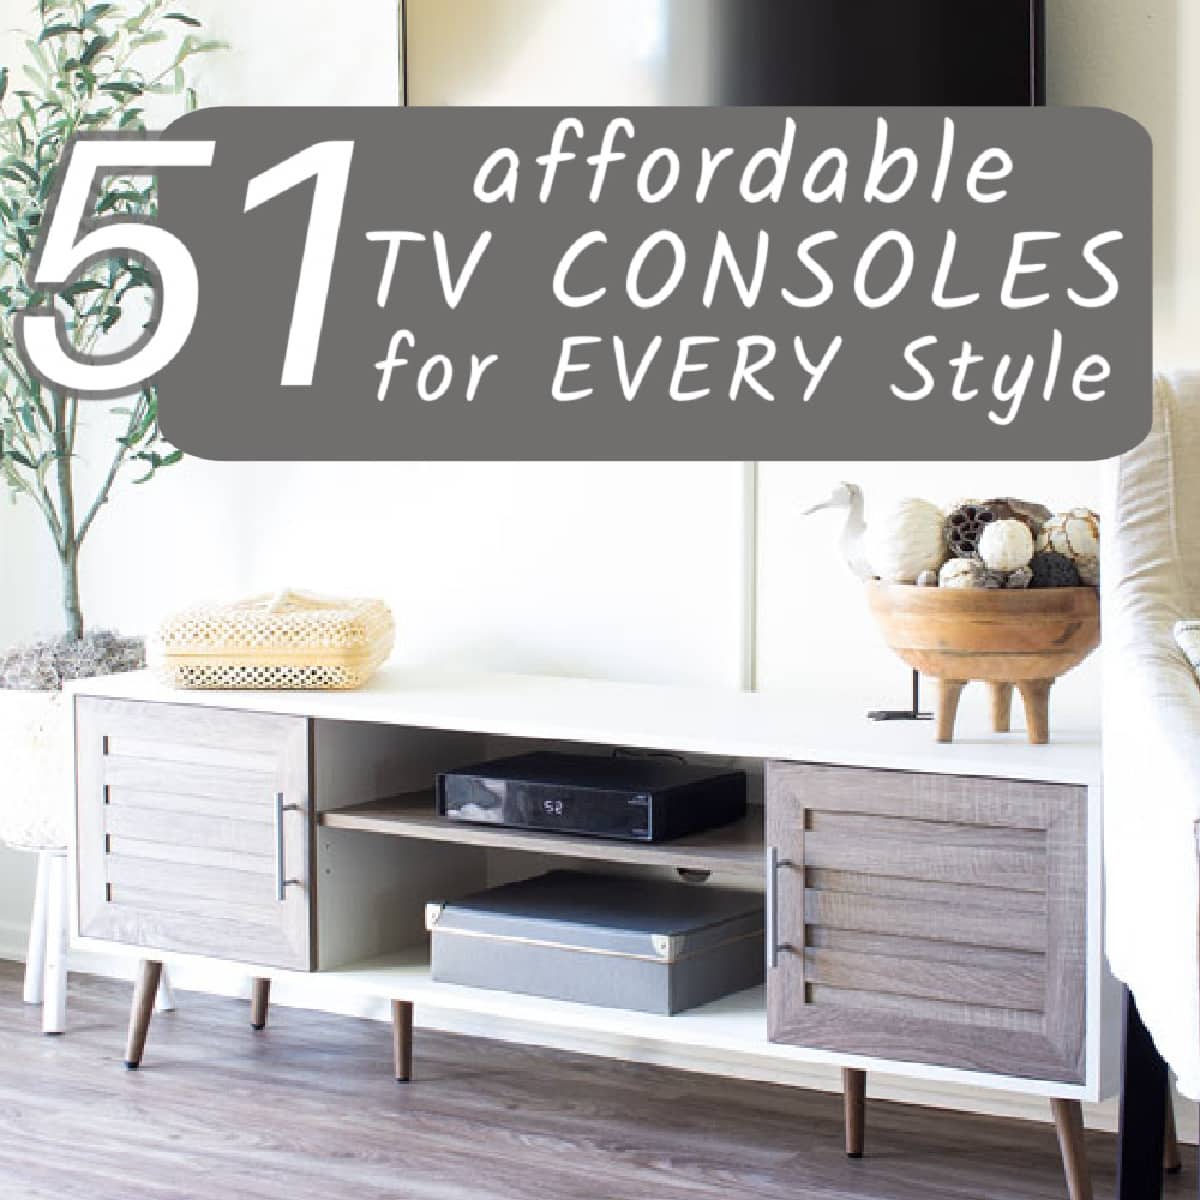 51 Affordable TV Consoles for Any Decor Style